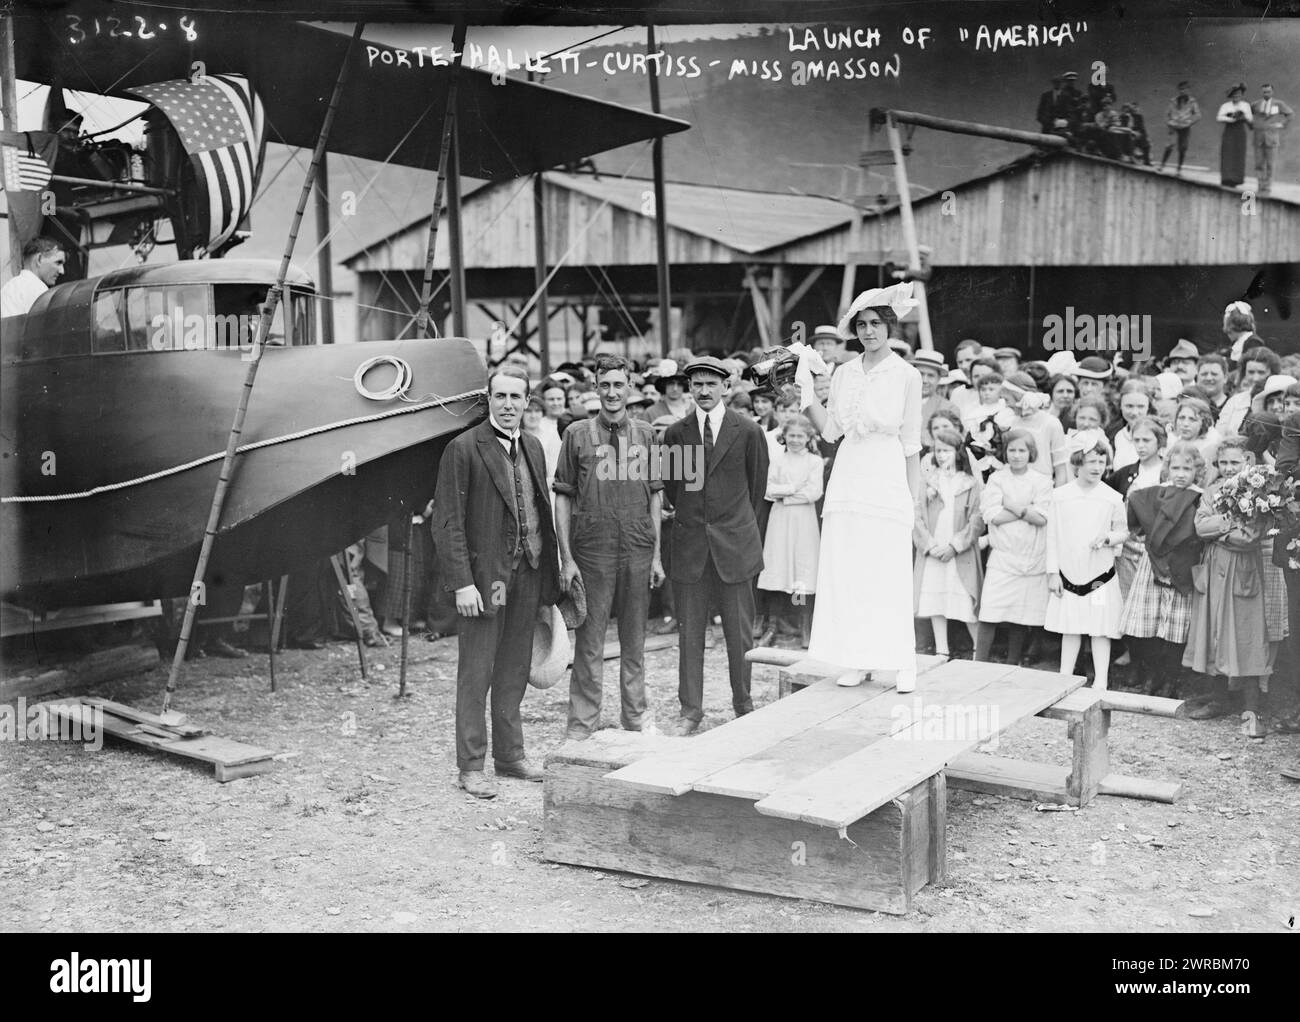 Porte, Hallett, Curtiss, Miss Masson, at launch of 'America', Photograph shows the christening and launch of the Curtiss Model H Flying Boat airplane 'America' on June 22, 1914 in Hammondsport, New York. From left to right, aviators John Cyril Porte, George E.A. Hallett, builder Glenn Curtiss and Katherine Masson., 1914 June 22, Glass negatives, 1 negative: glass Stock Photo